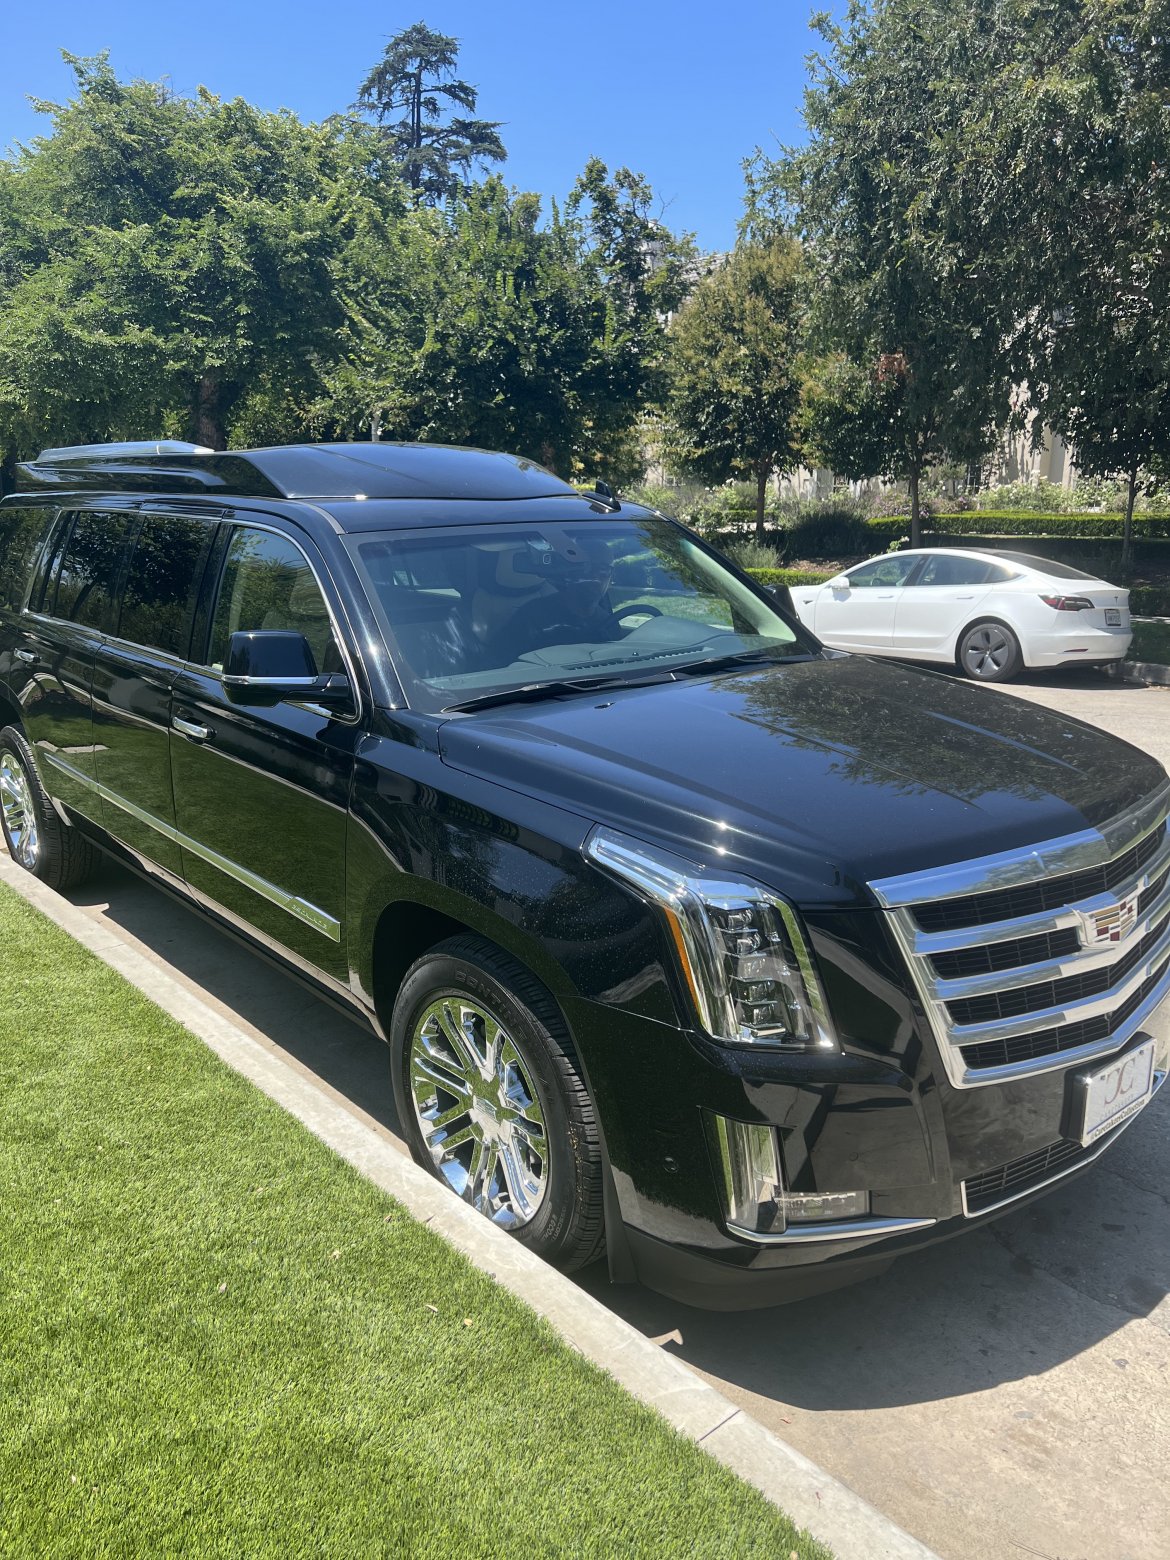 CEO SUV Mobile Office for sale: 2017 Cadillac Escalade